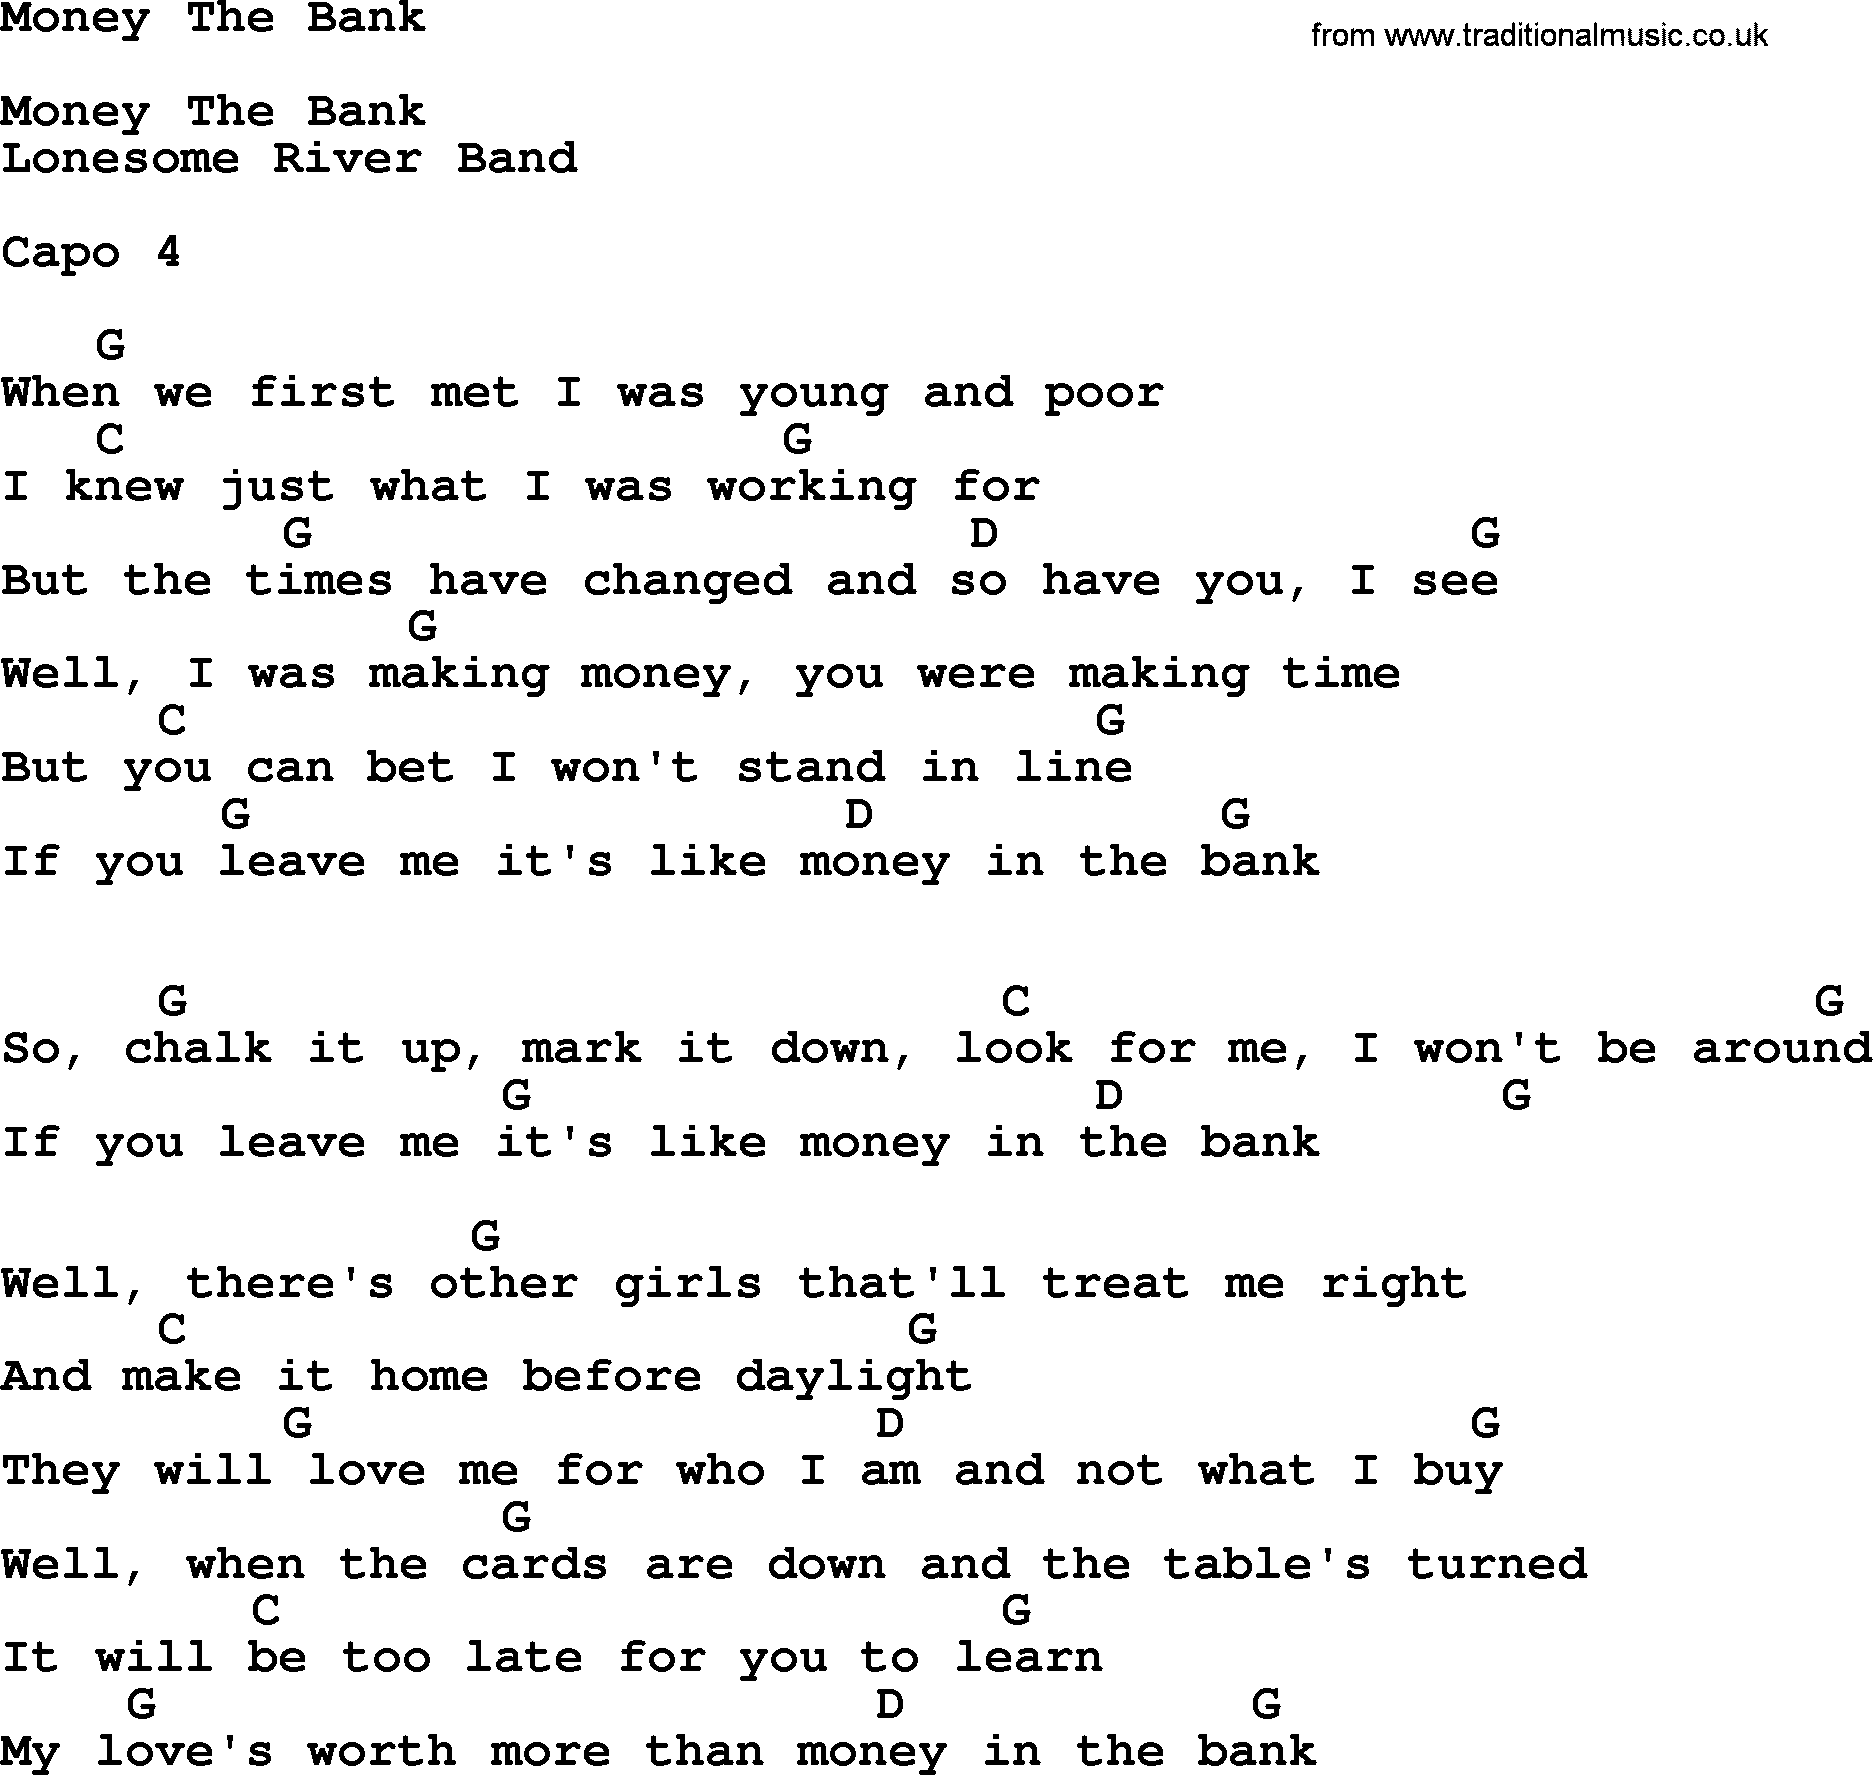 Bluegrass song: Money The Bank, lyrics and chords